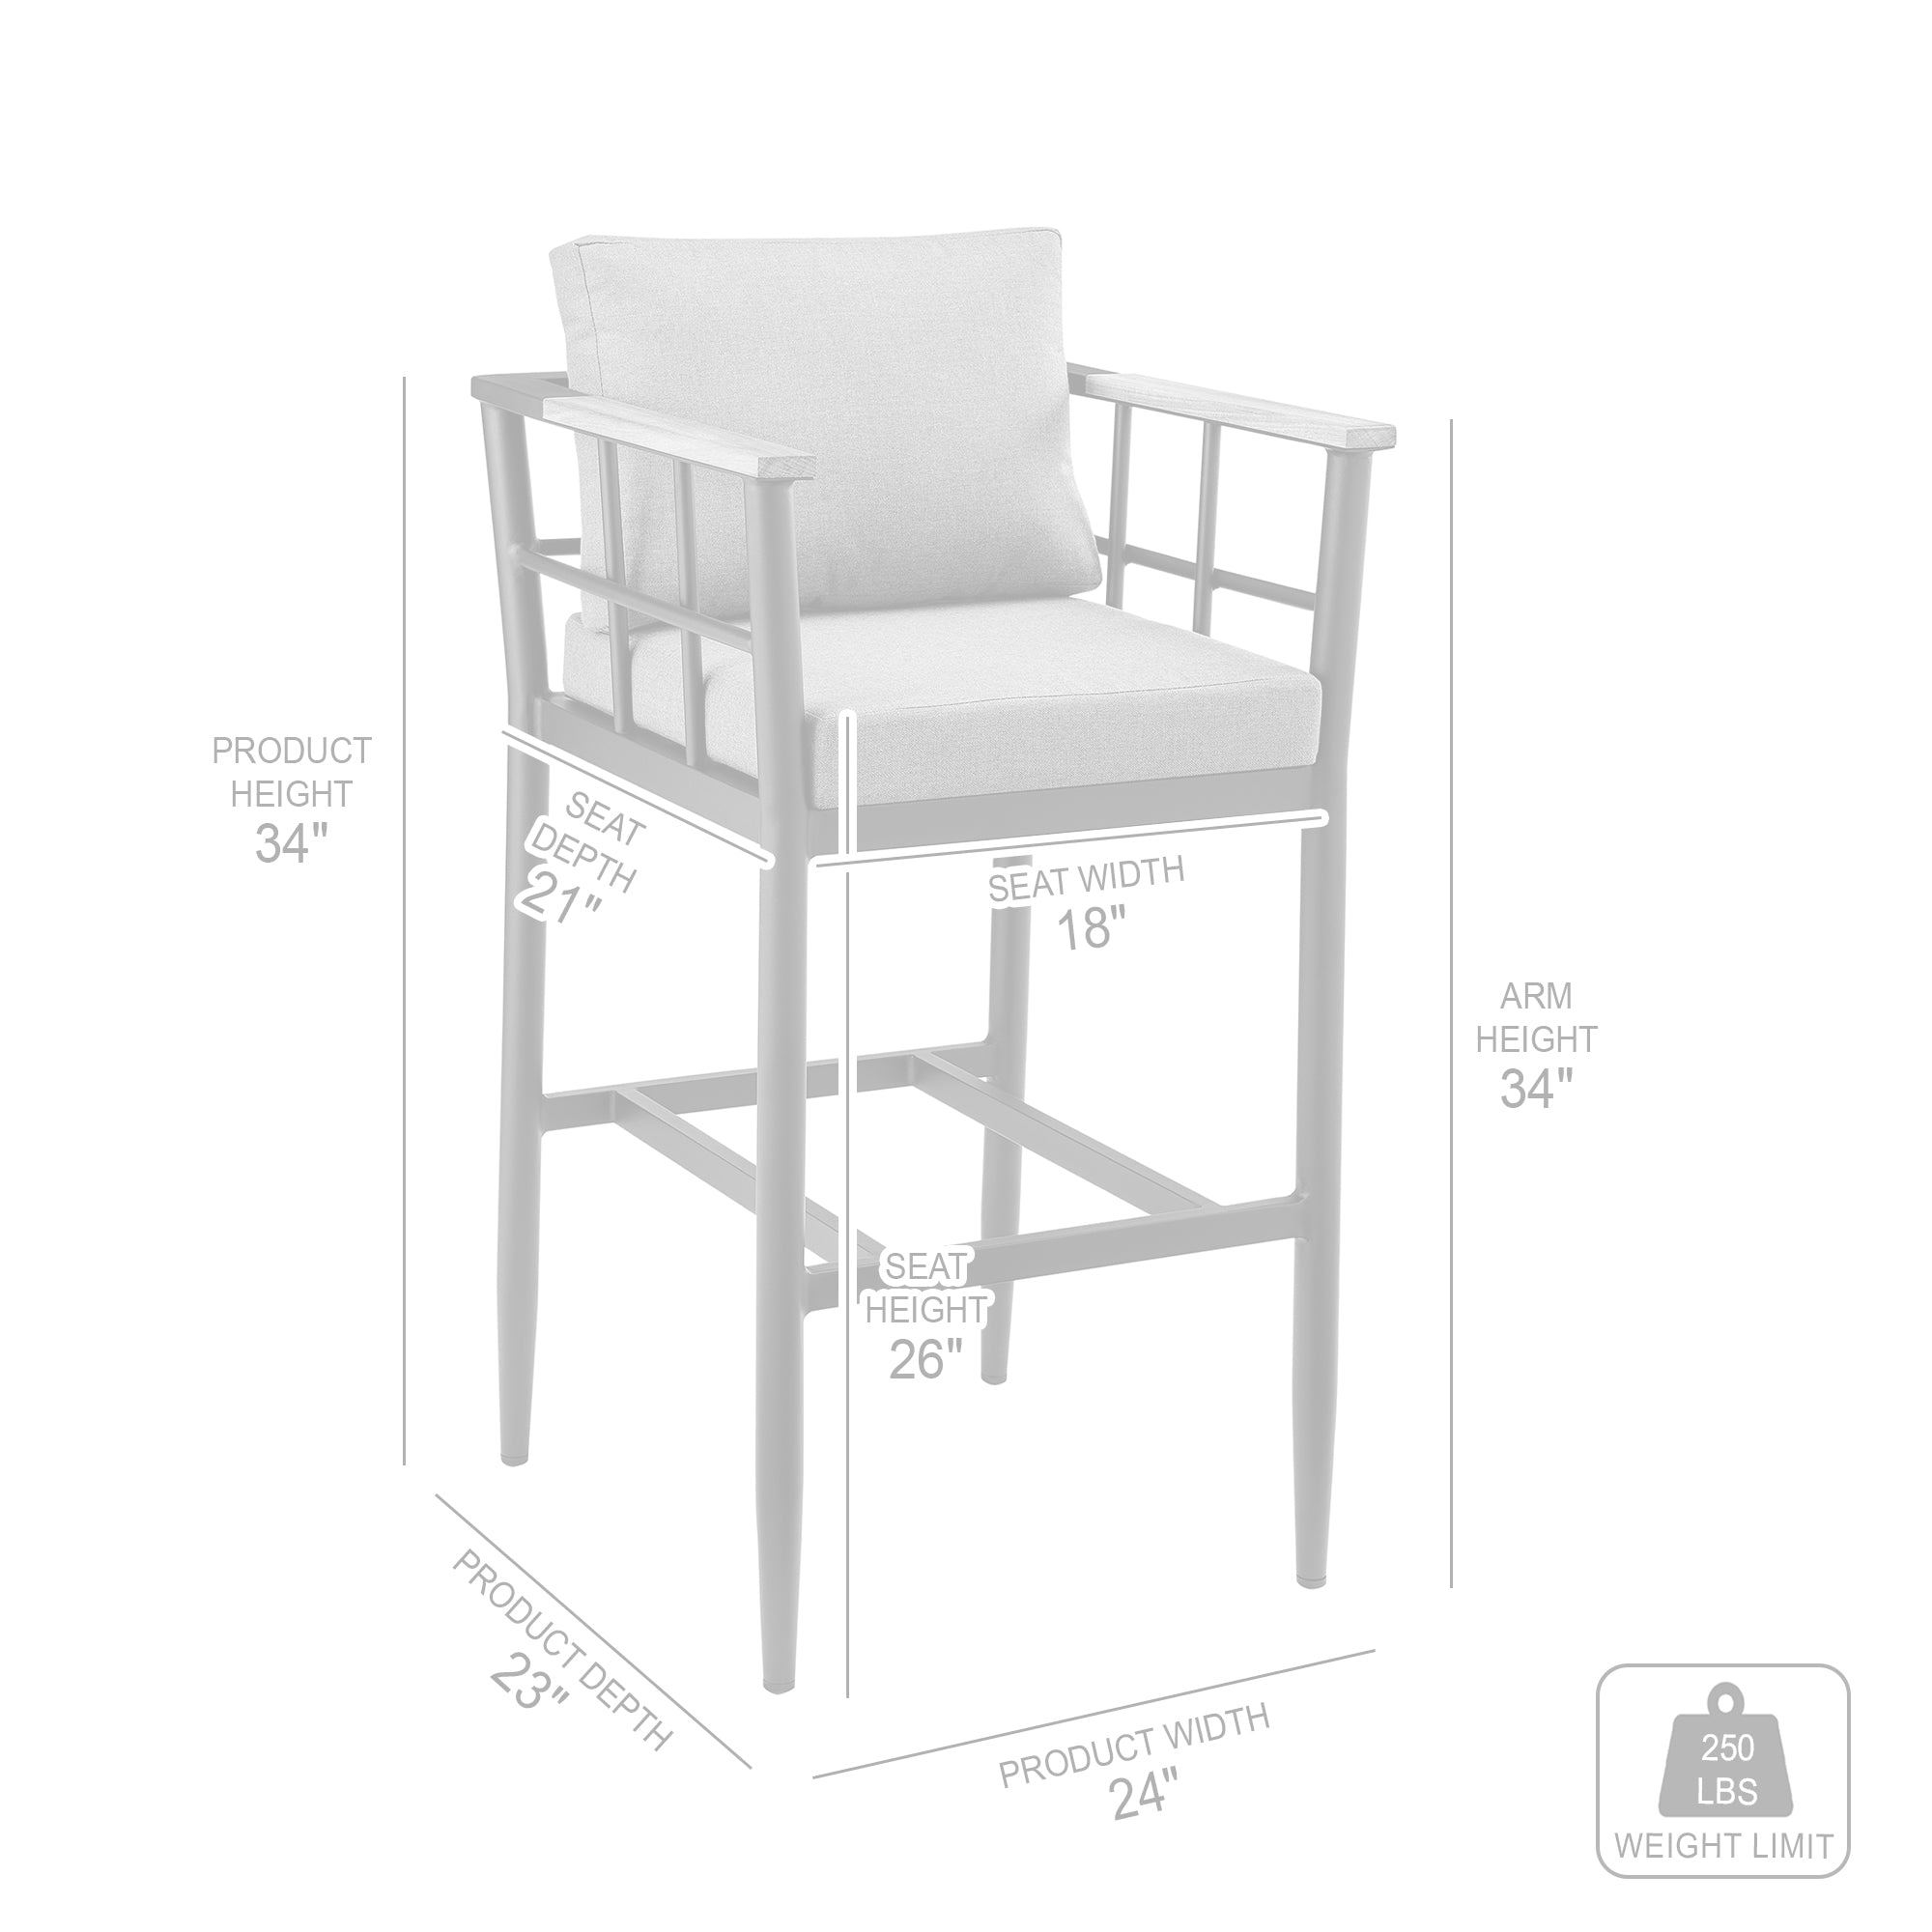 Armen Living - Wiglaf Outdoor Patio Counter or Bar Height Bar Stool in Aluminum and Teak with Grey Cushions - 840254333048